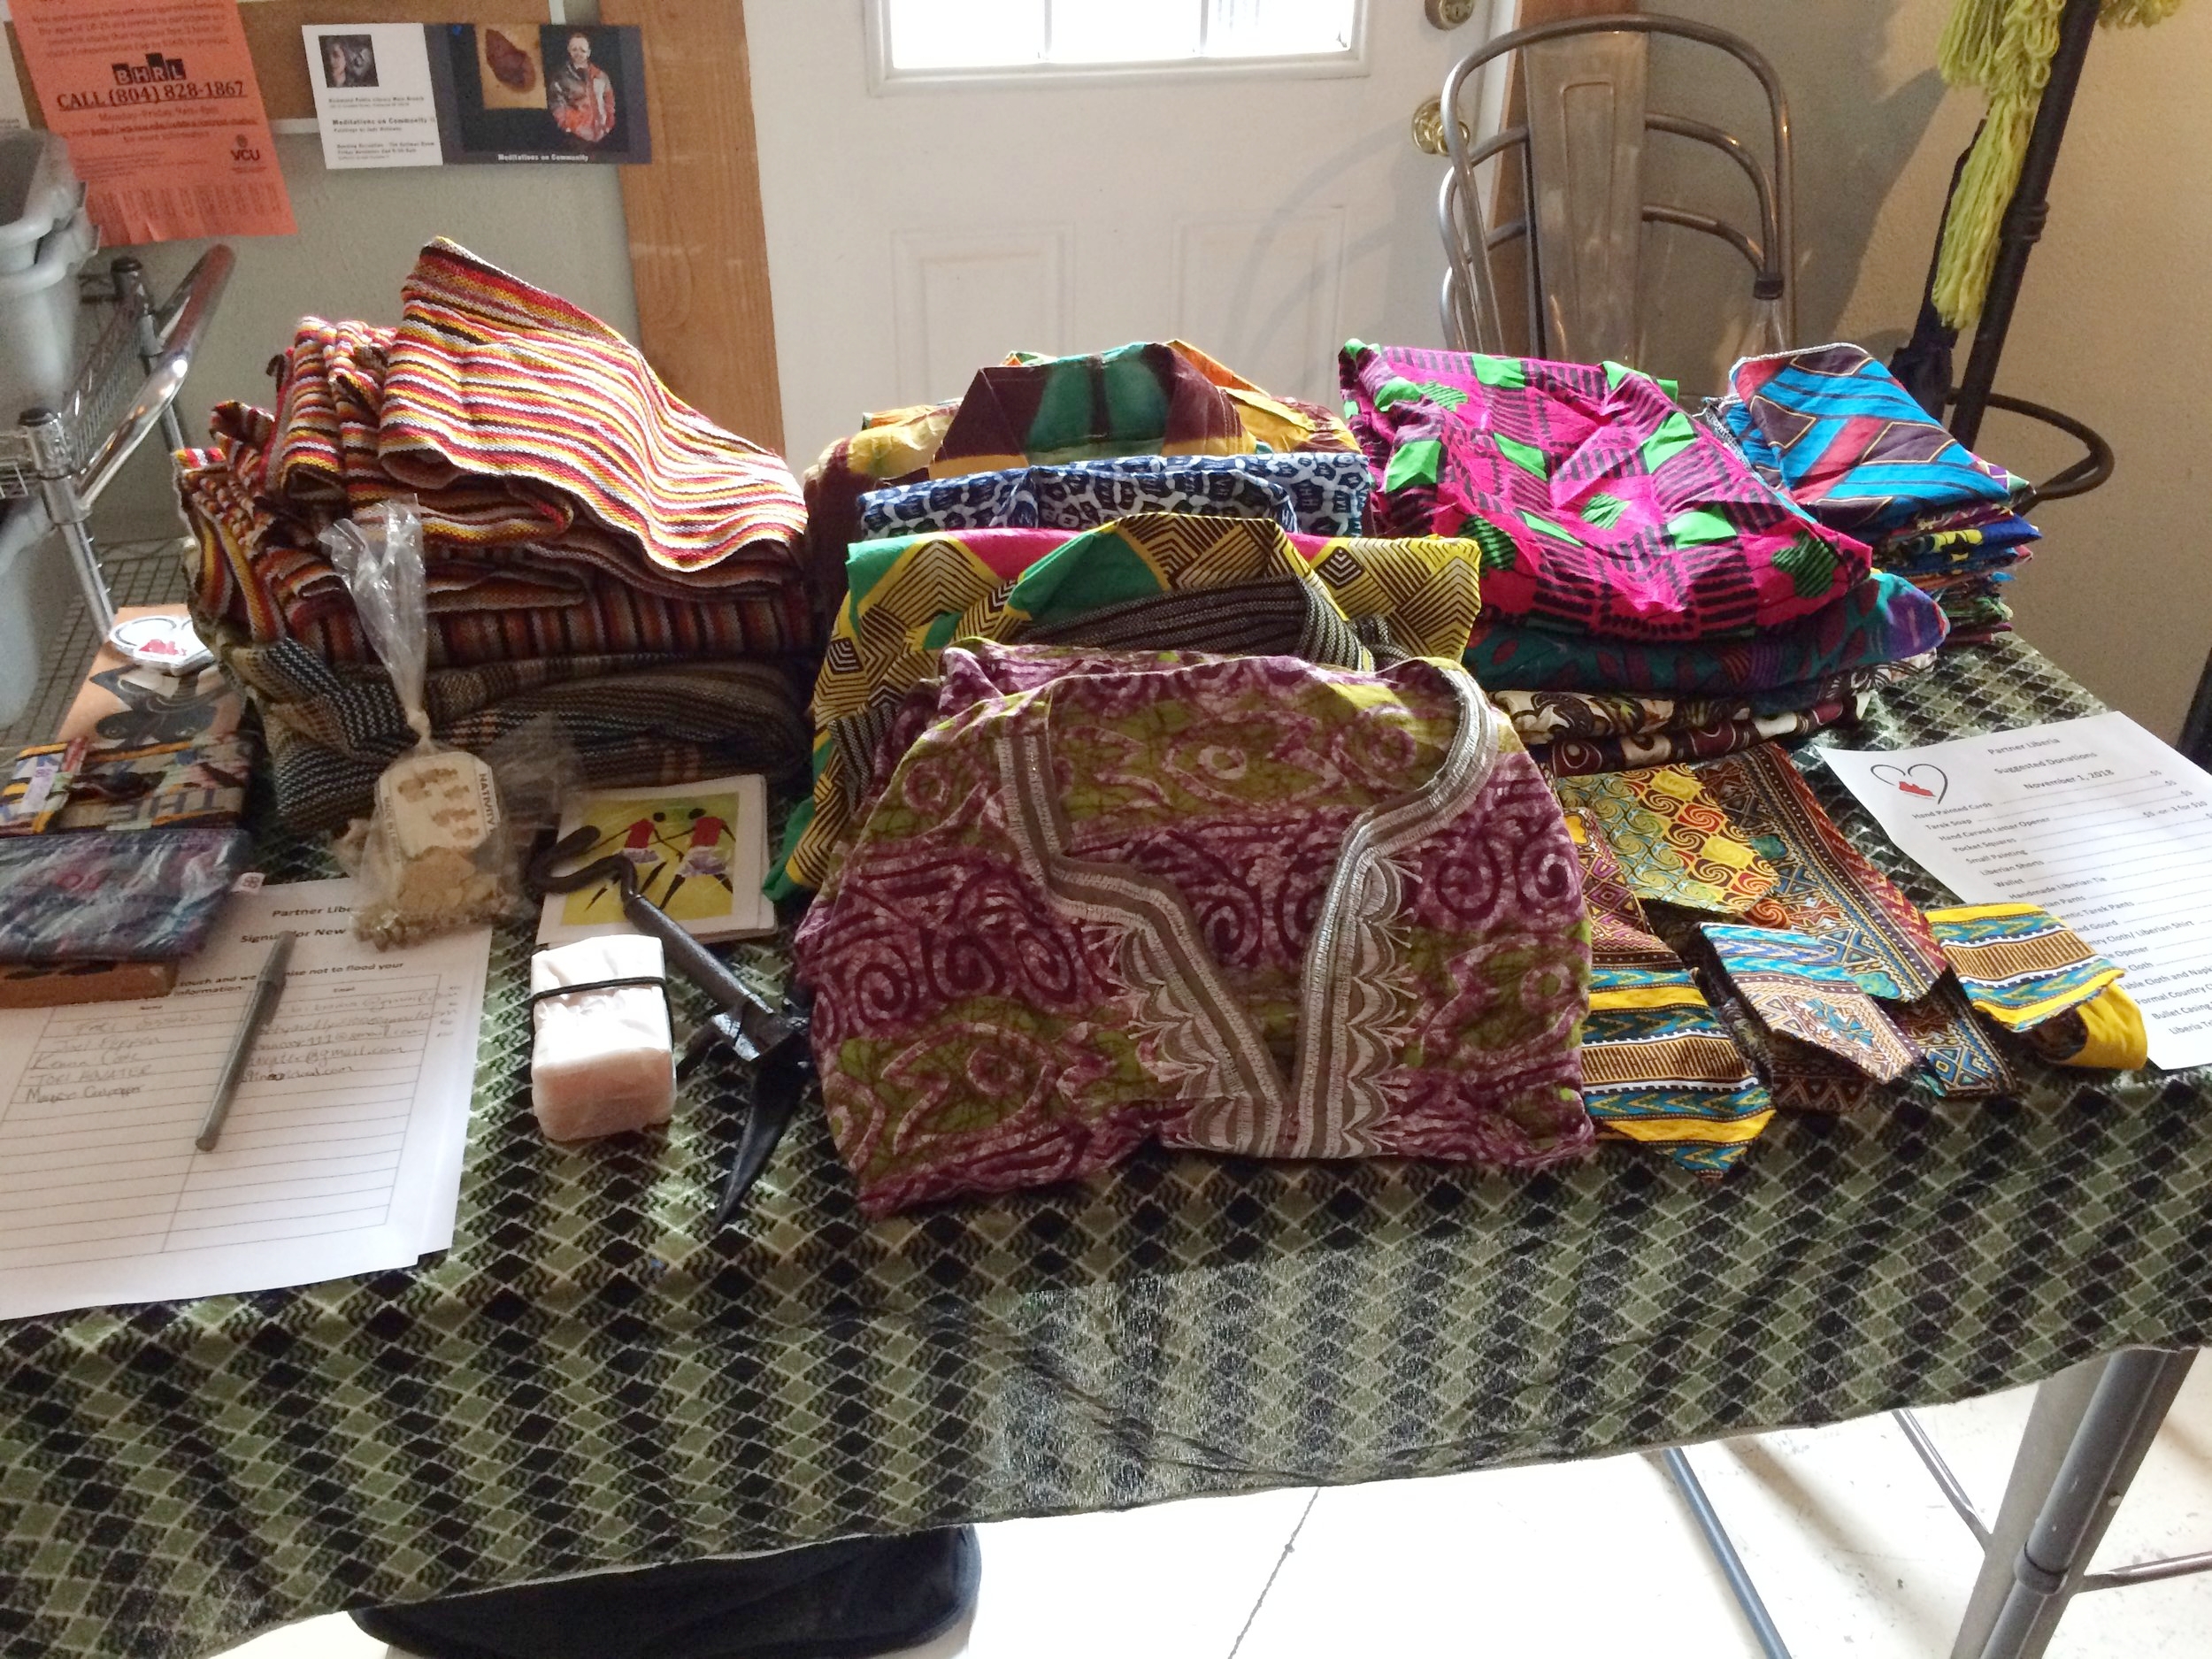  We had many items hand-made in Liberia to demonstrate our programs 